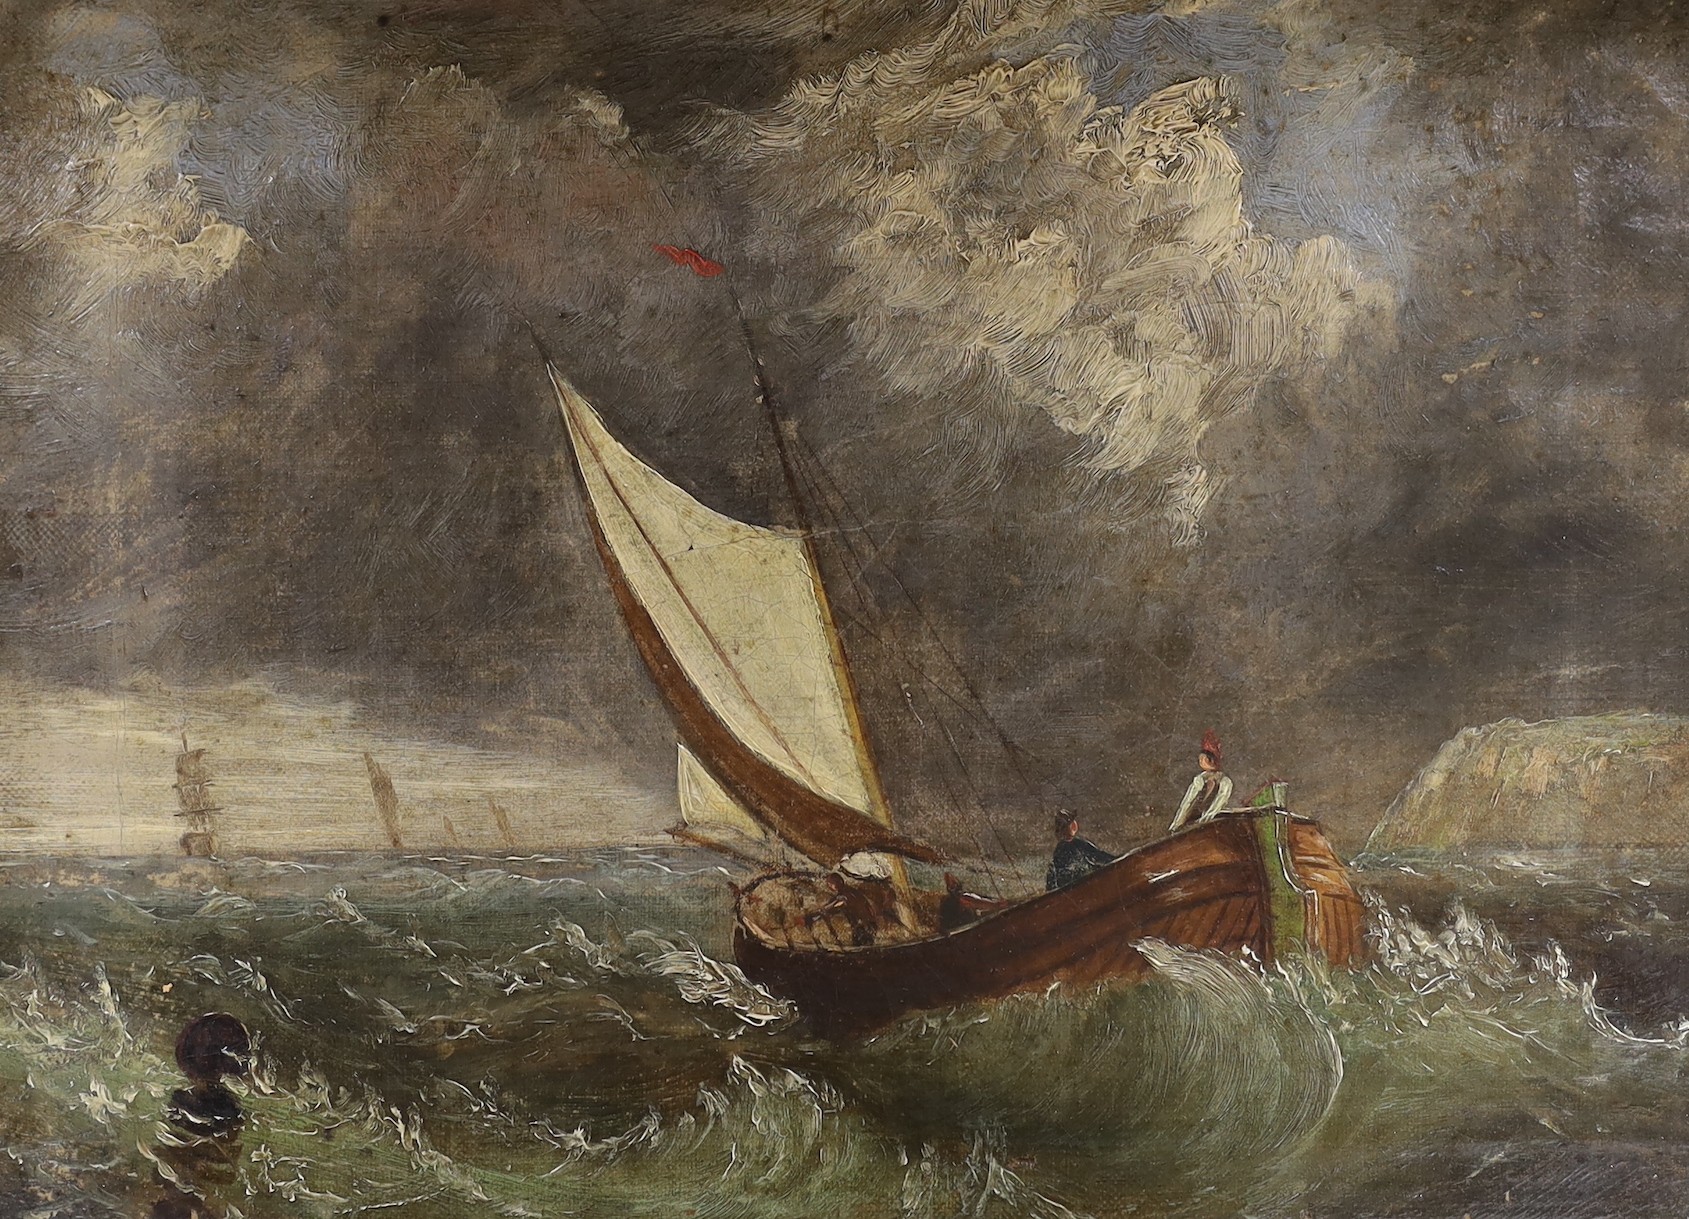 19th century English School, oil on canvas, Fishing boat leaving harbour, 22 x 29cm